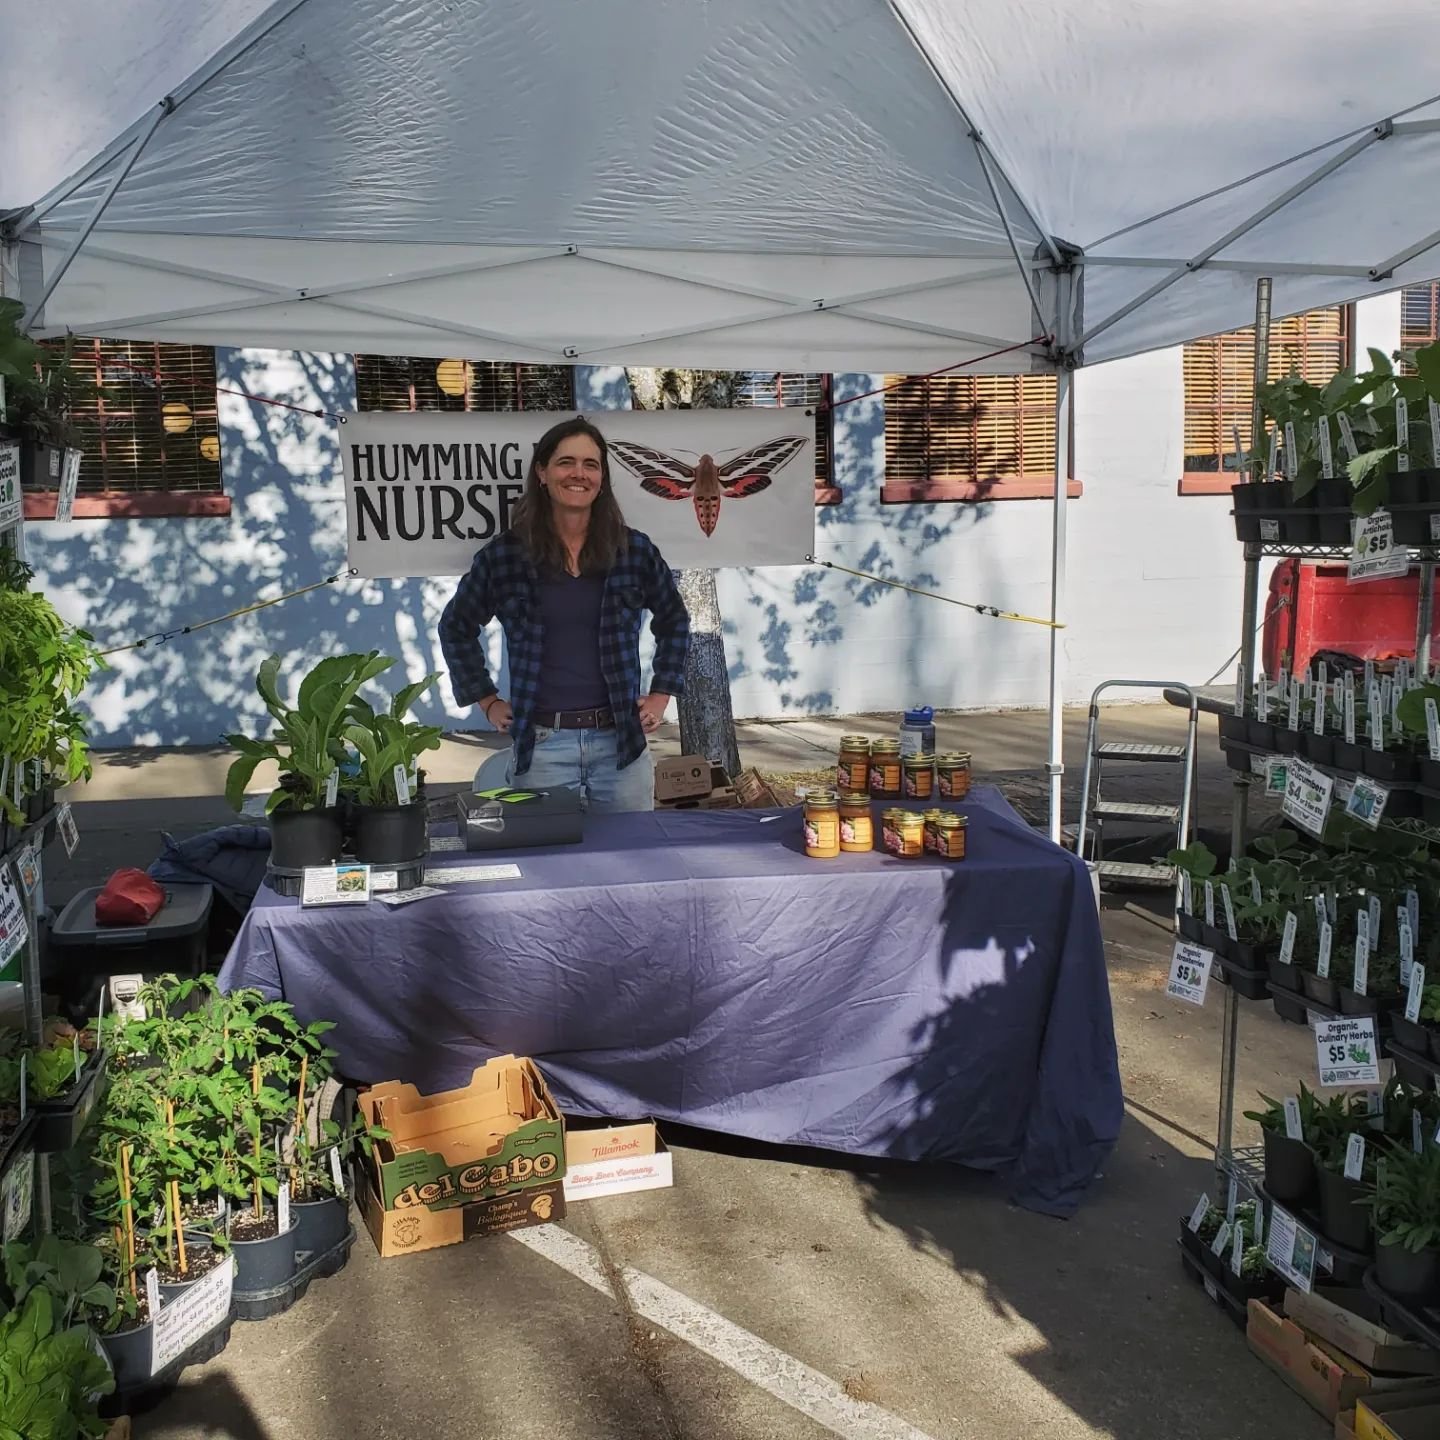 We had a great first day at @corvallisfarmersmarket ☀️

Thanks to everyone who came out to support all these rad local farms- it's quite an honor to be part of the market community. 

We'll be back next week with more certified organic veggies, herbs